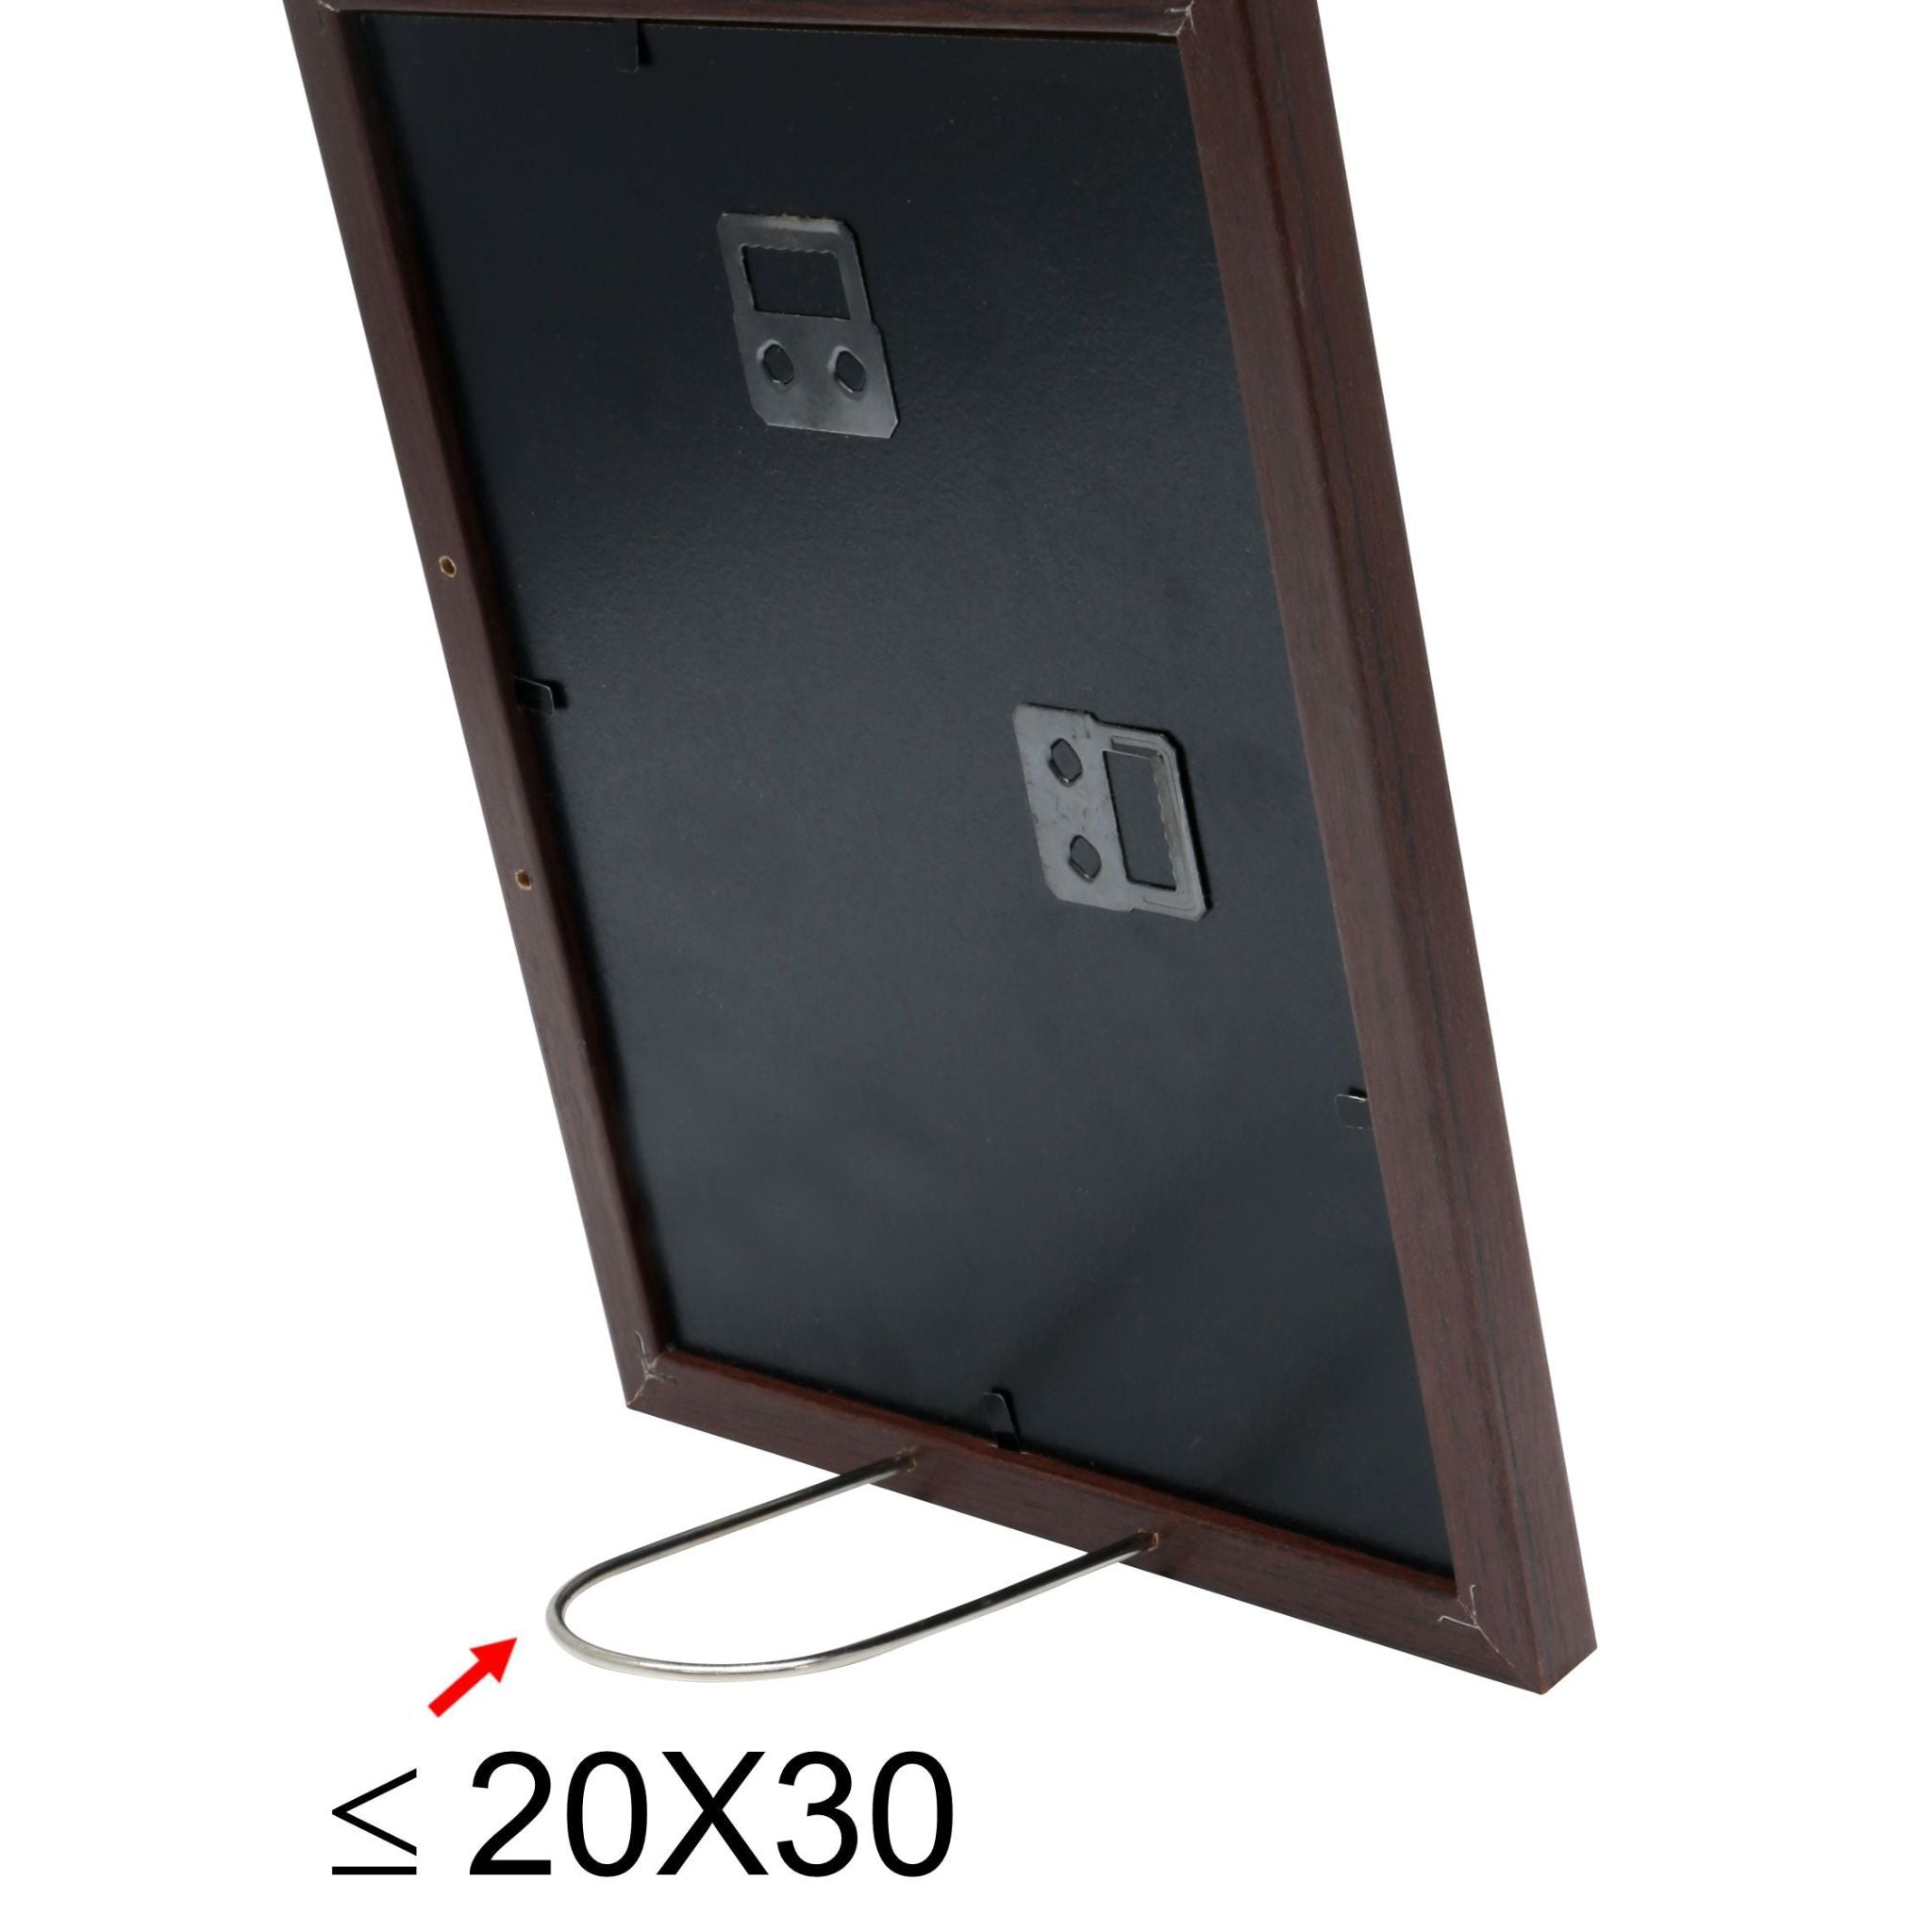 Picture frame in dark brown wood color